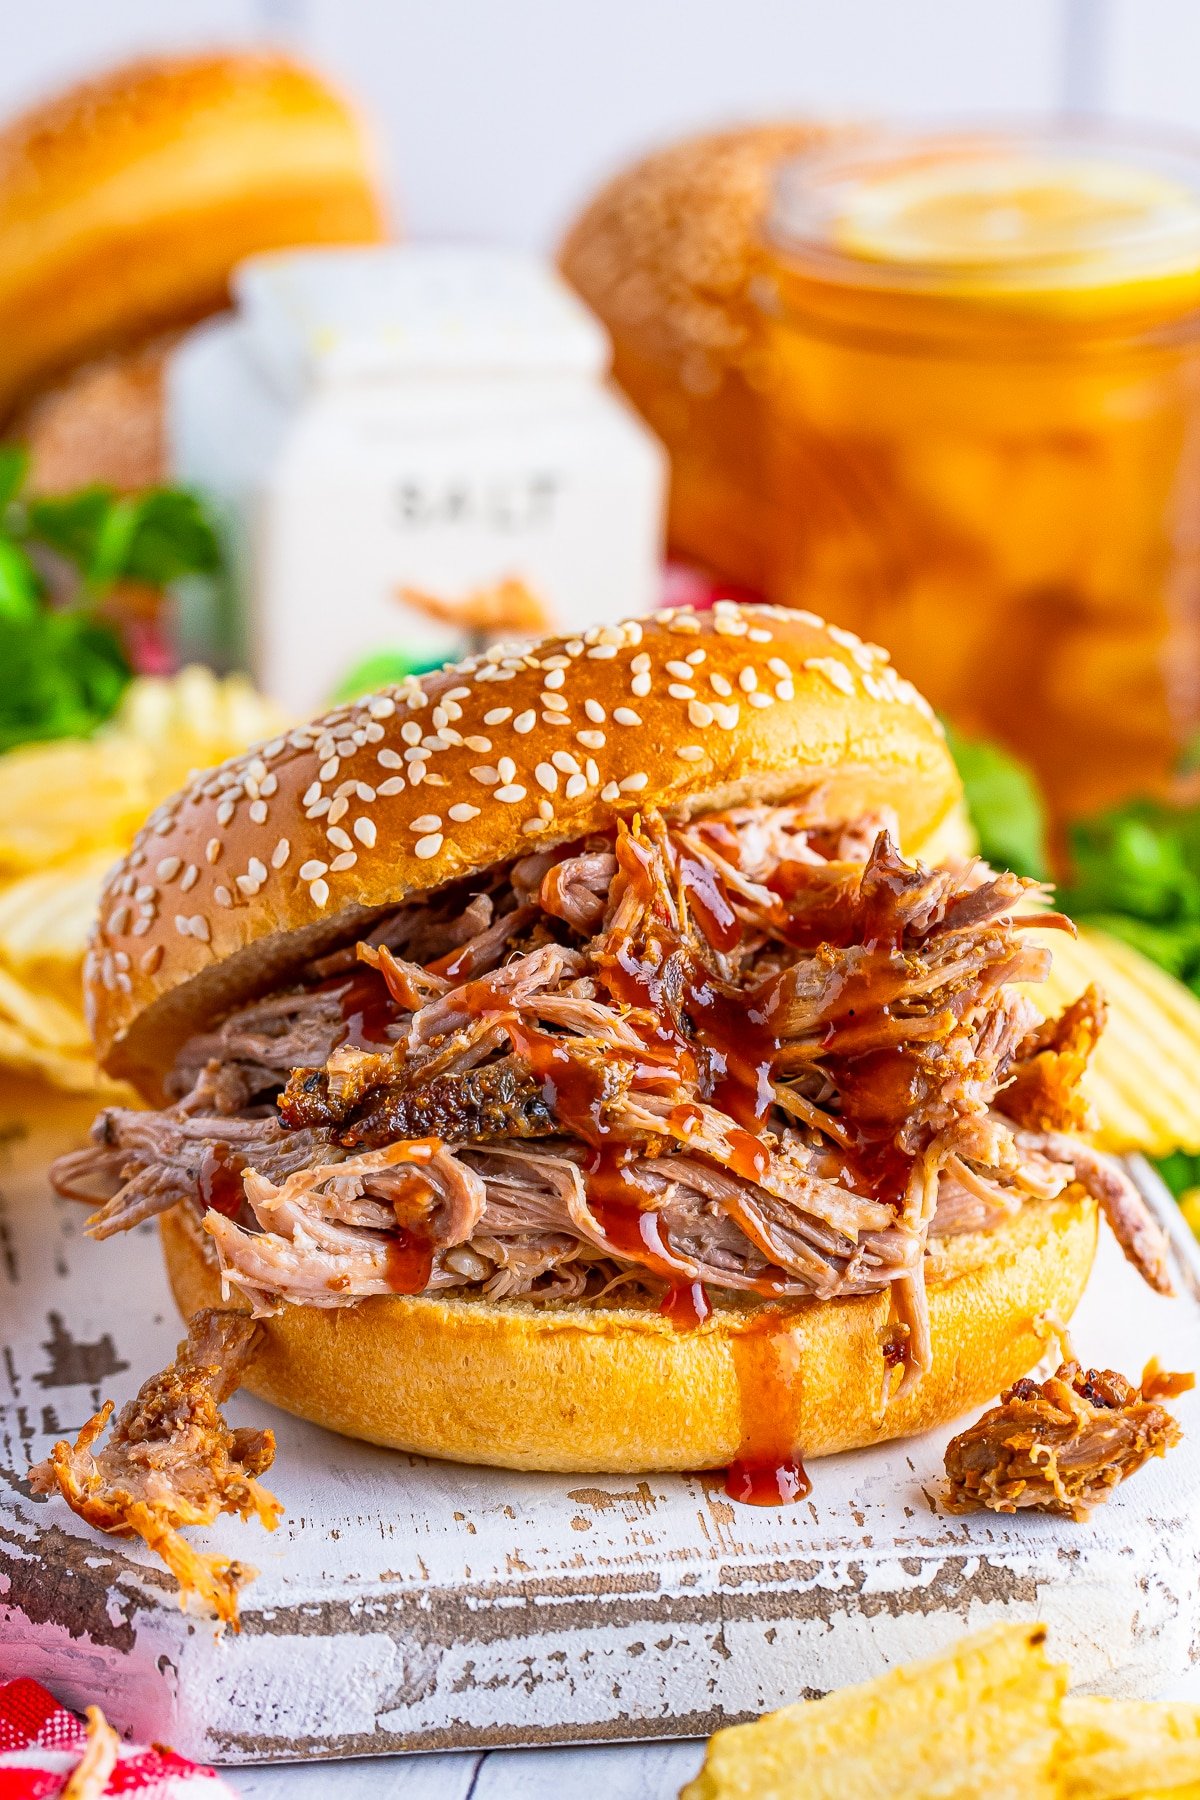 Oven Baked Pulled Pork on a bun 